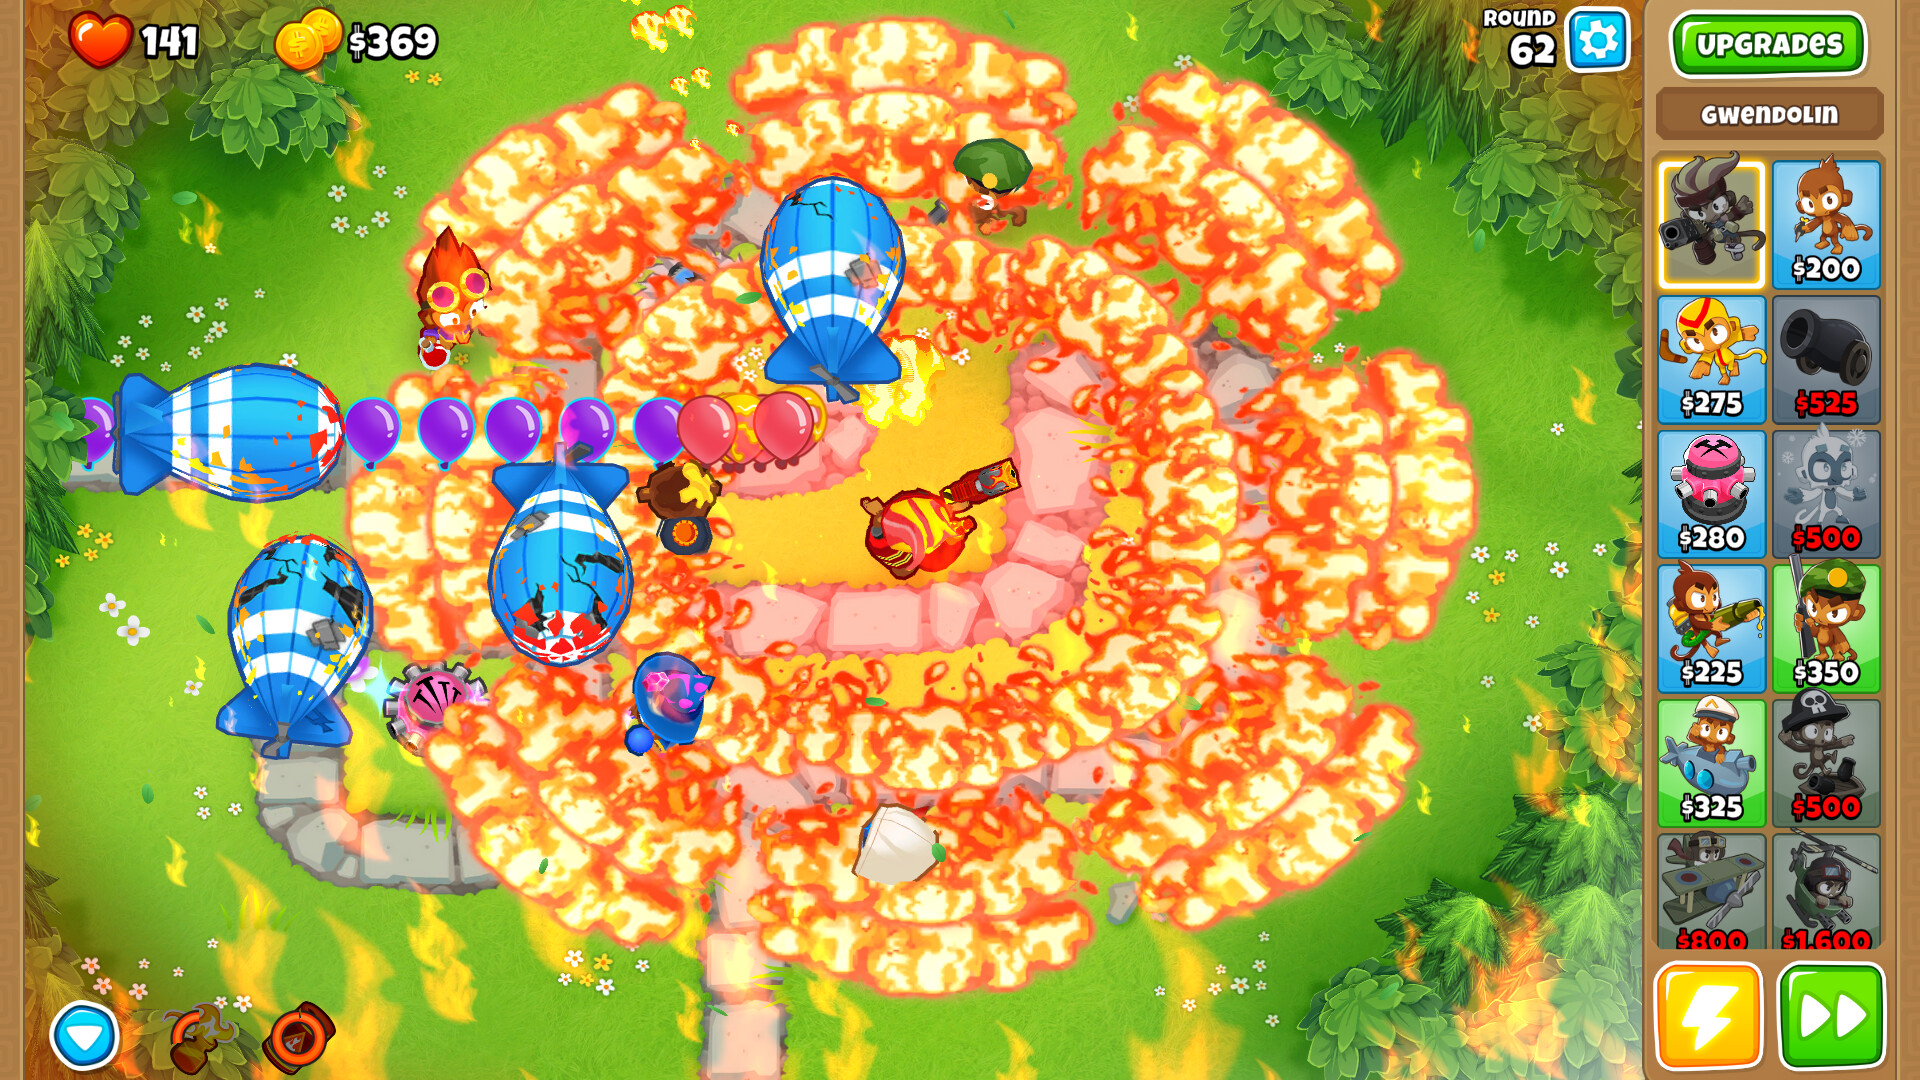 bloons td 6 1.8 mod